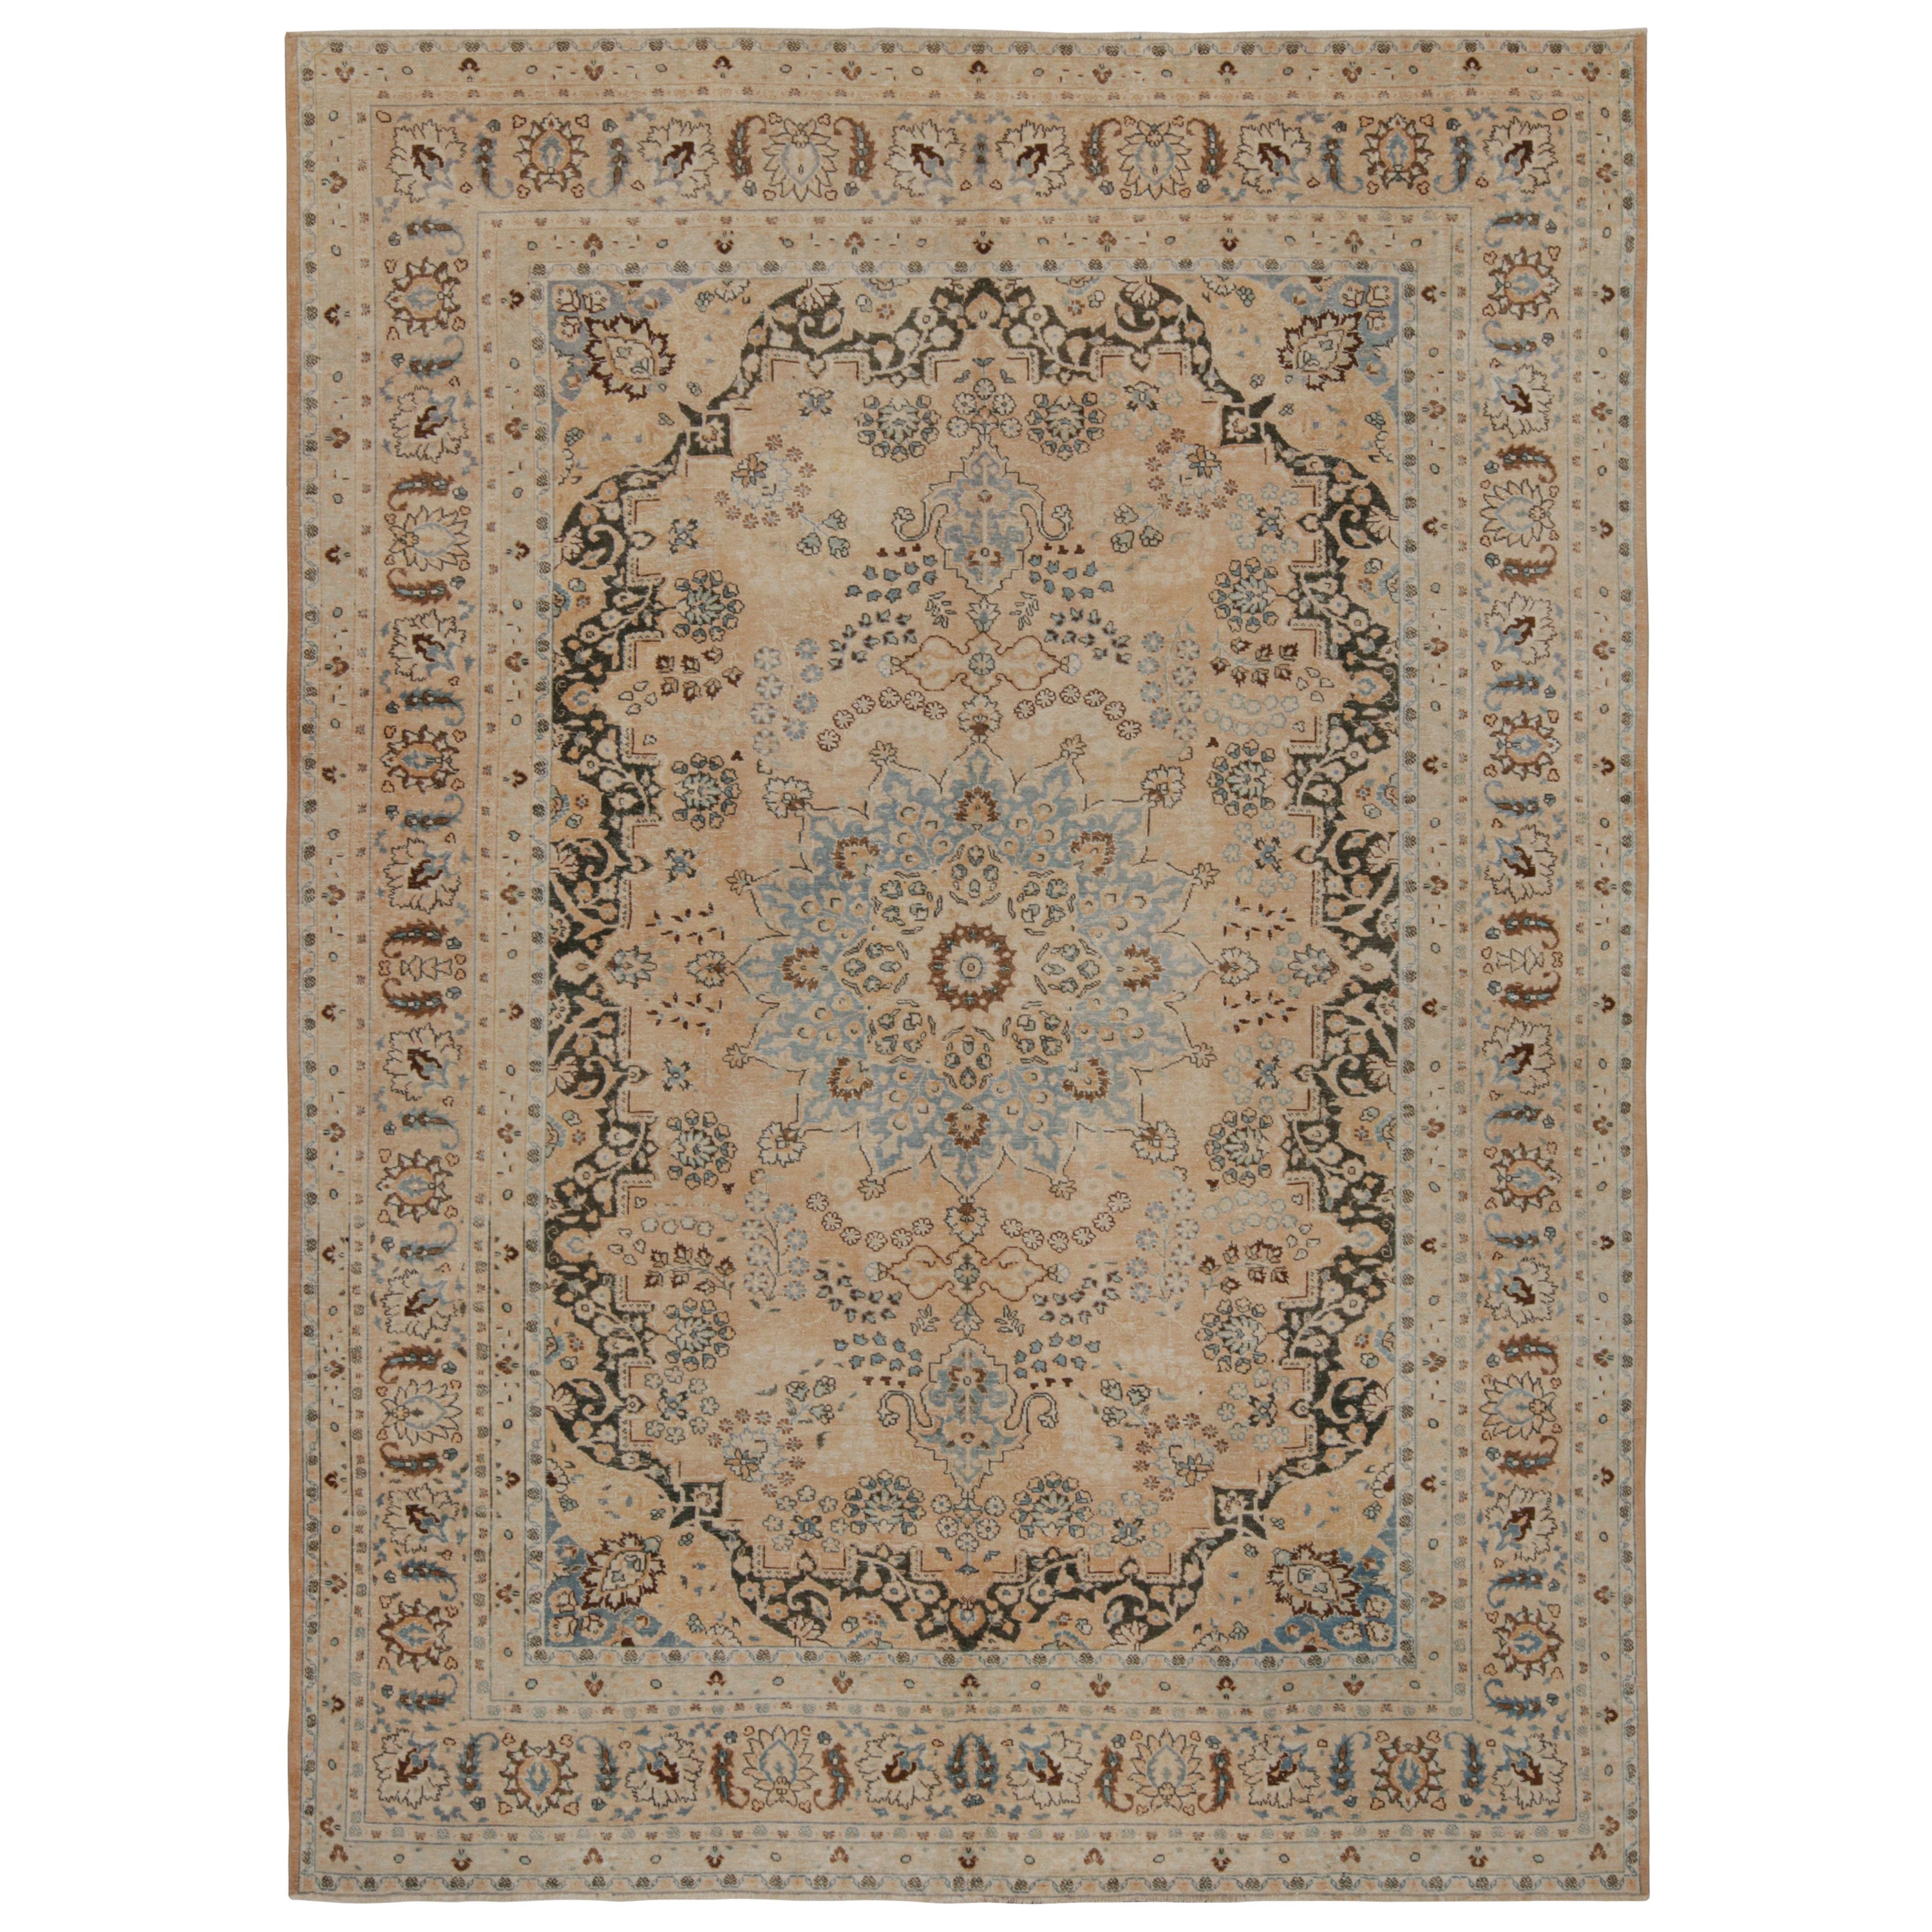 Antique Persian Yazd rug in Beige, with Floral Patterns, from Rug & Kilim For Sale